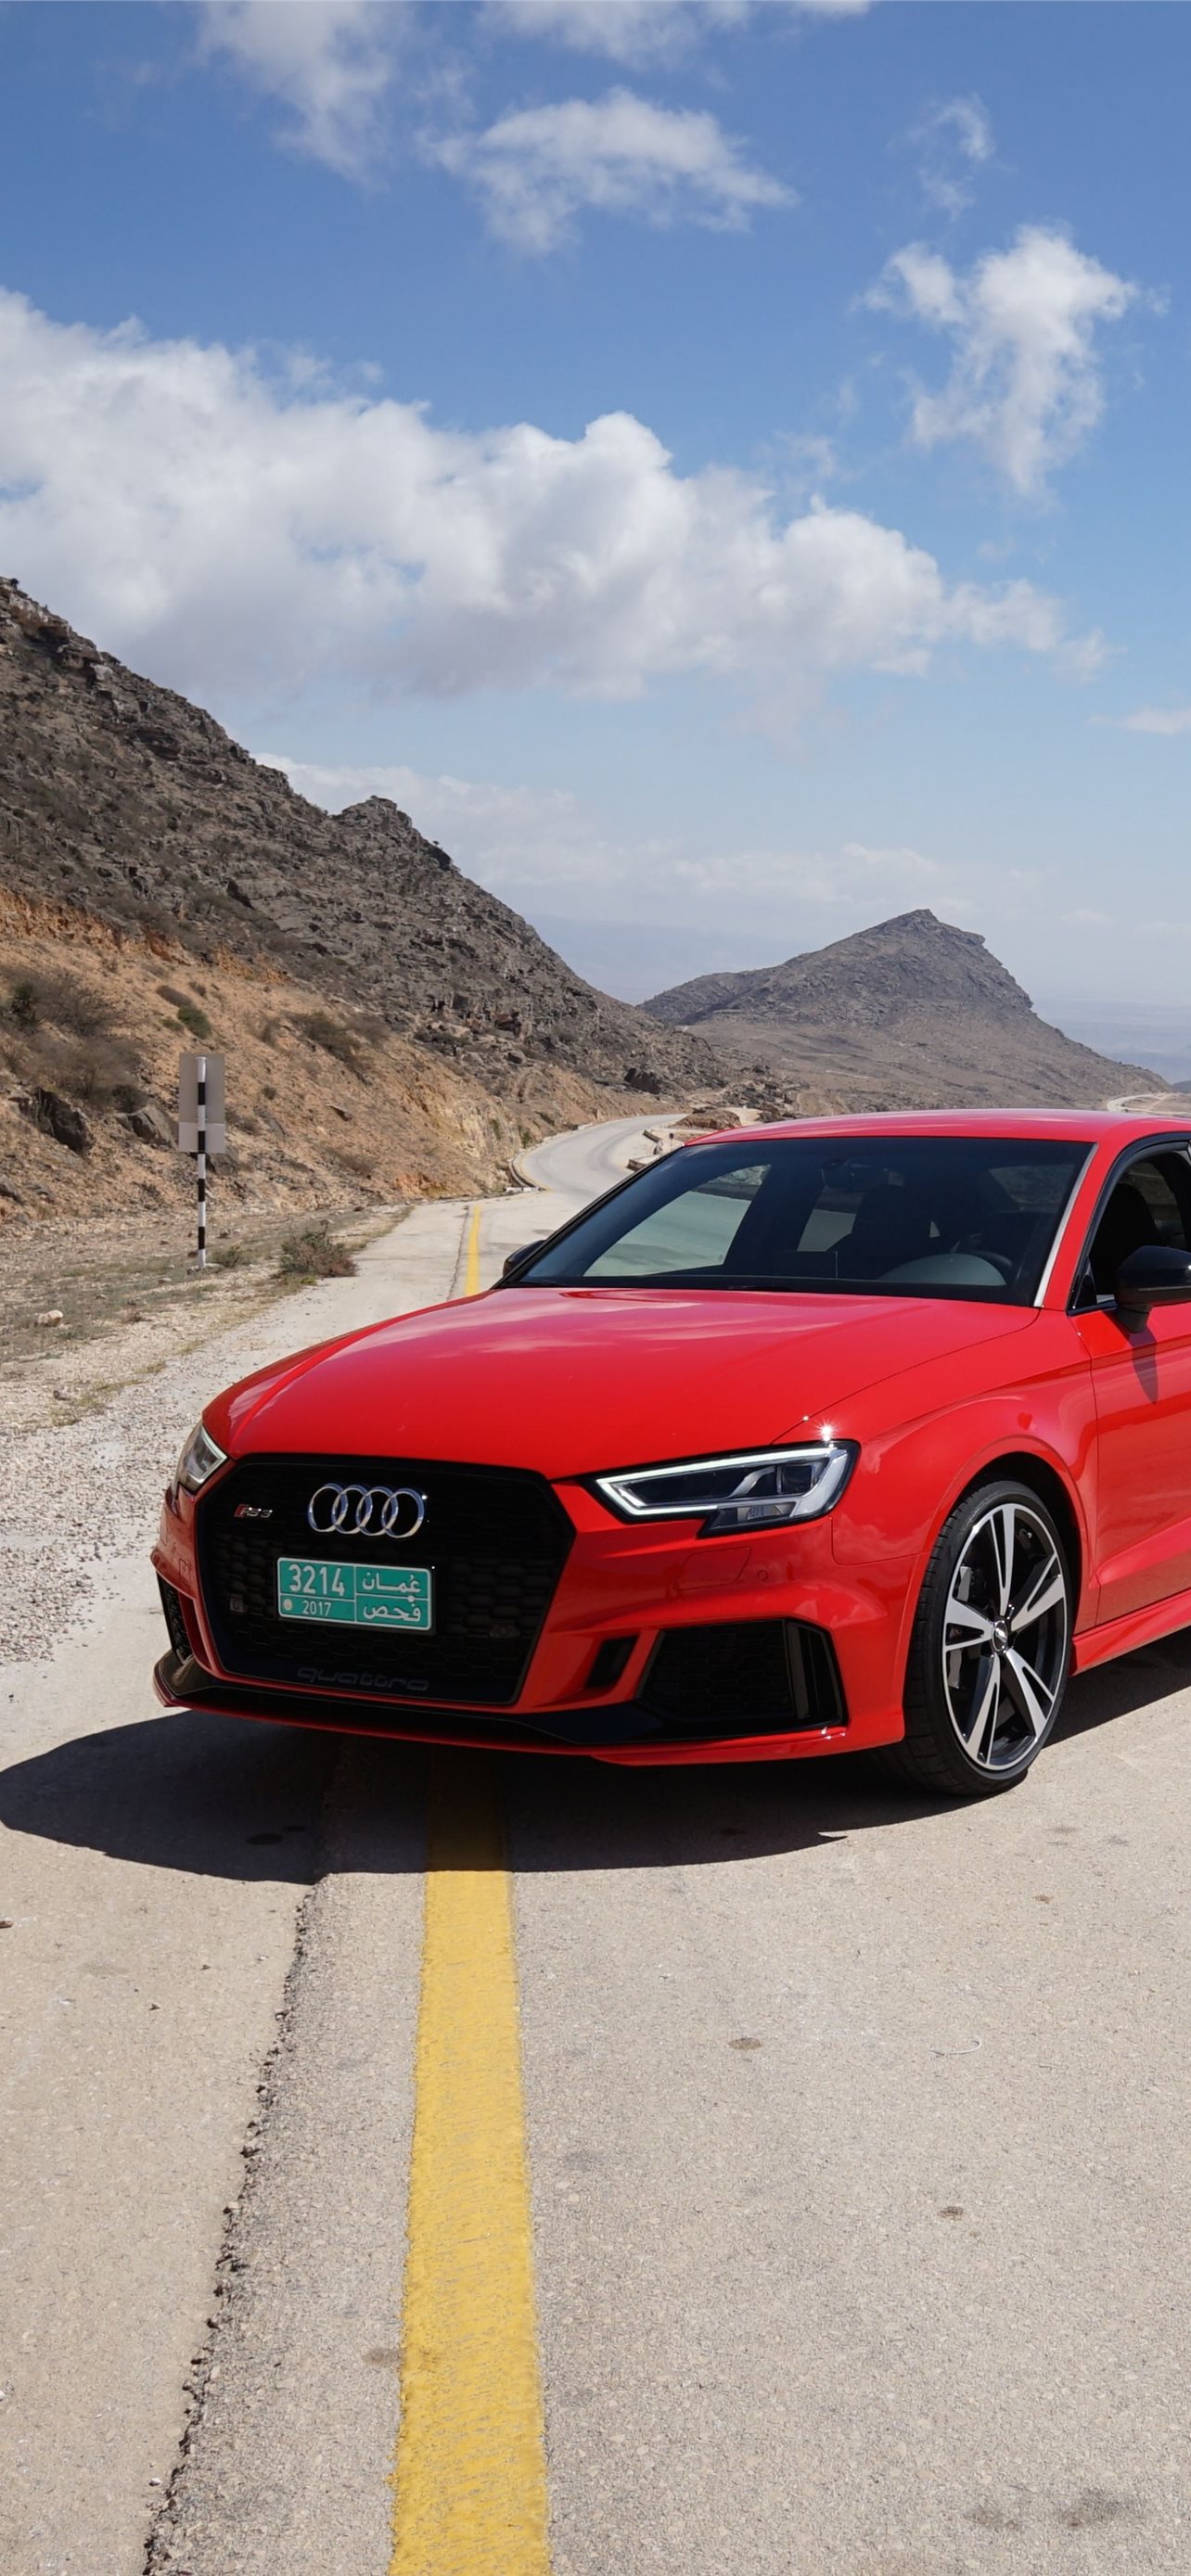 10 Audi RS3 HD Wallpapers and Backgrounds